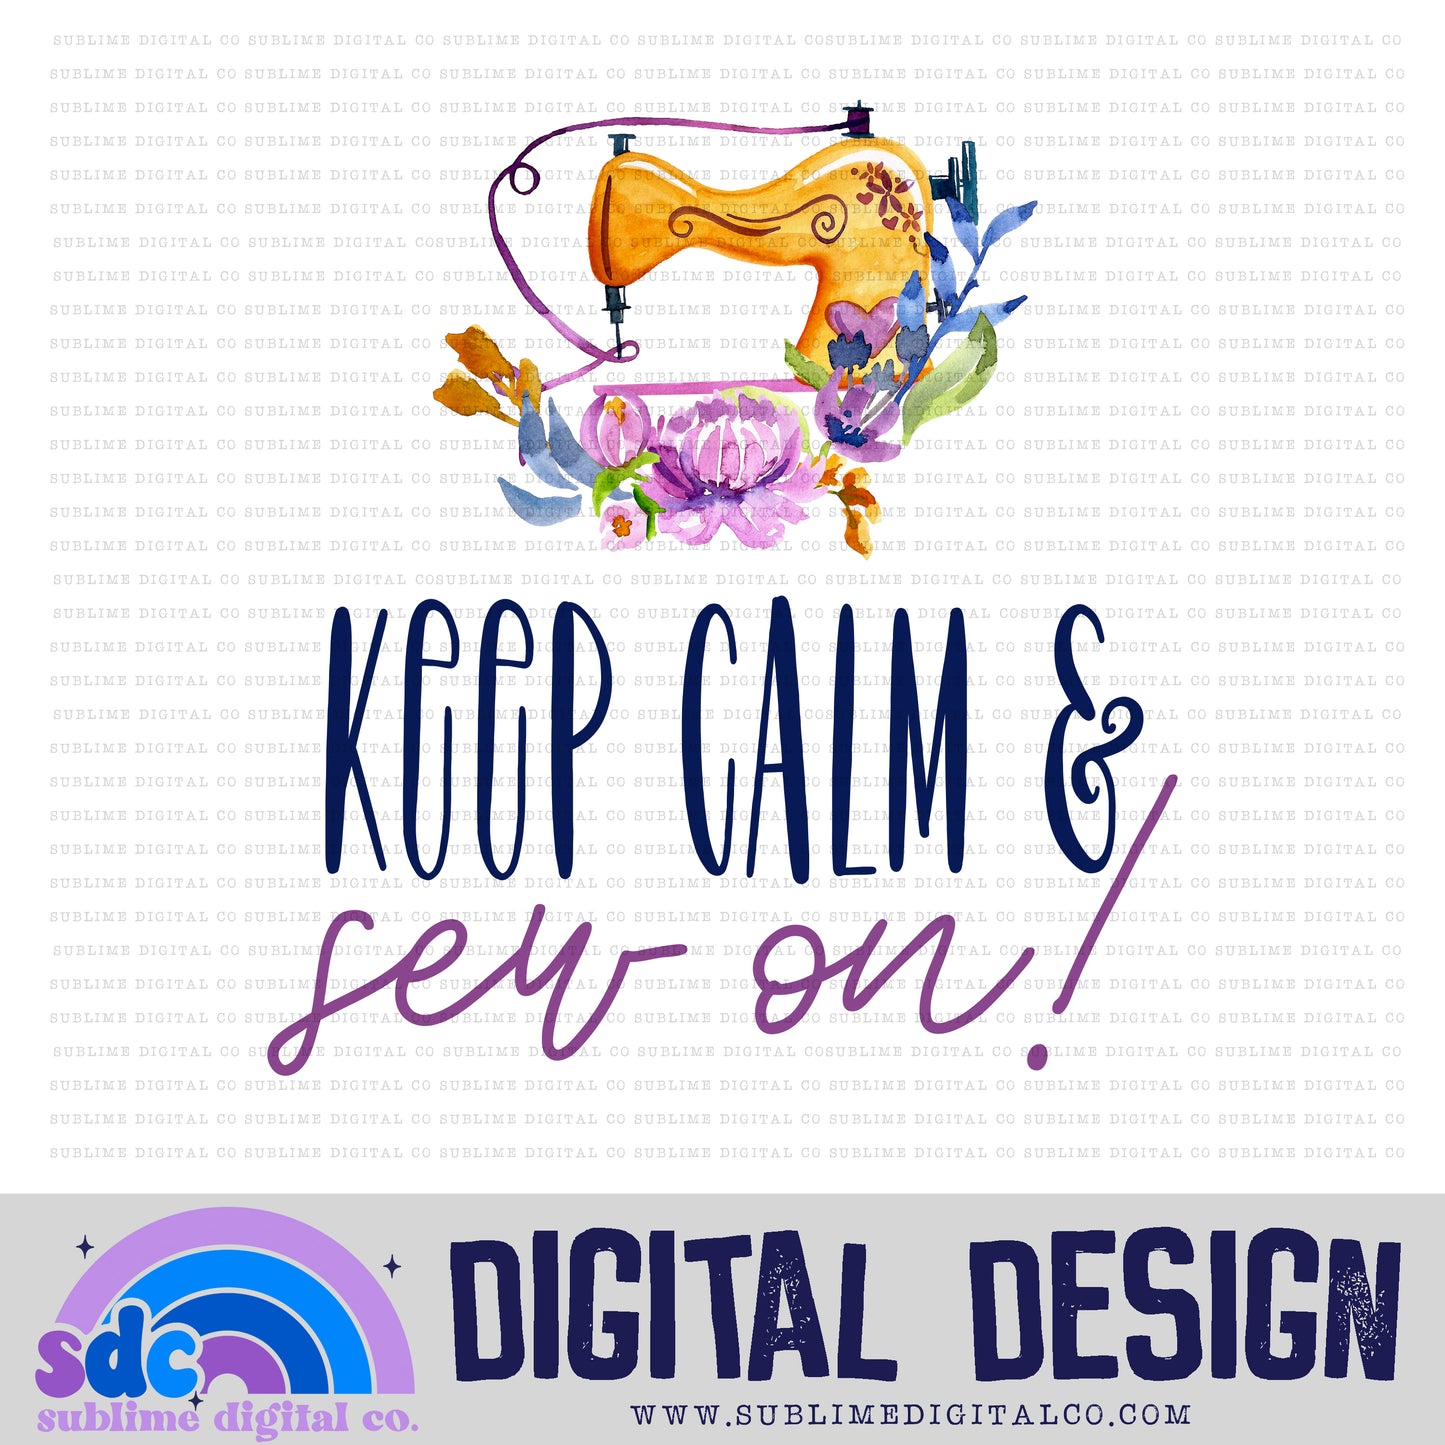 Keep Calm & Sew On  • Instant Download • Sublimation Design